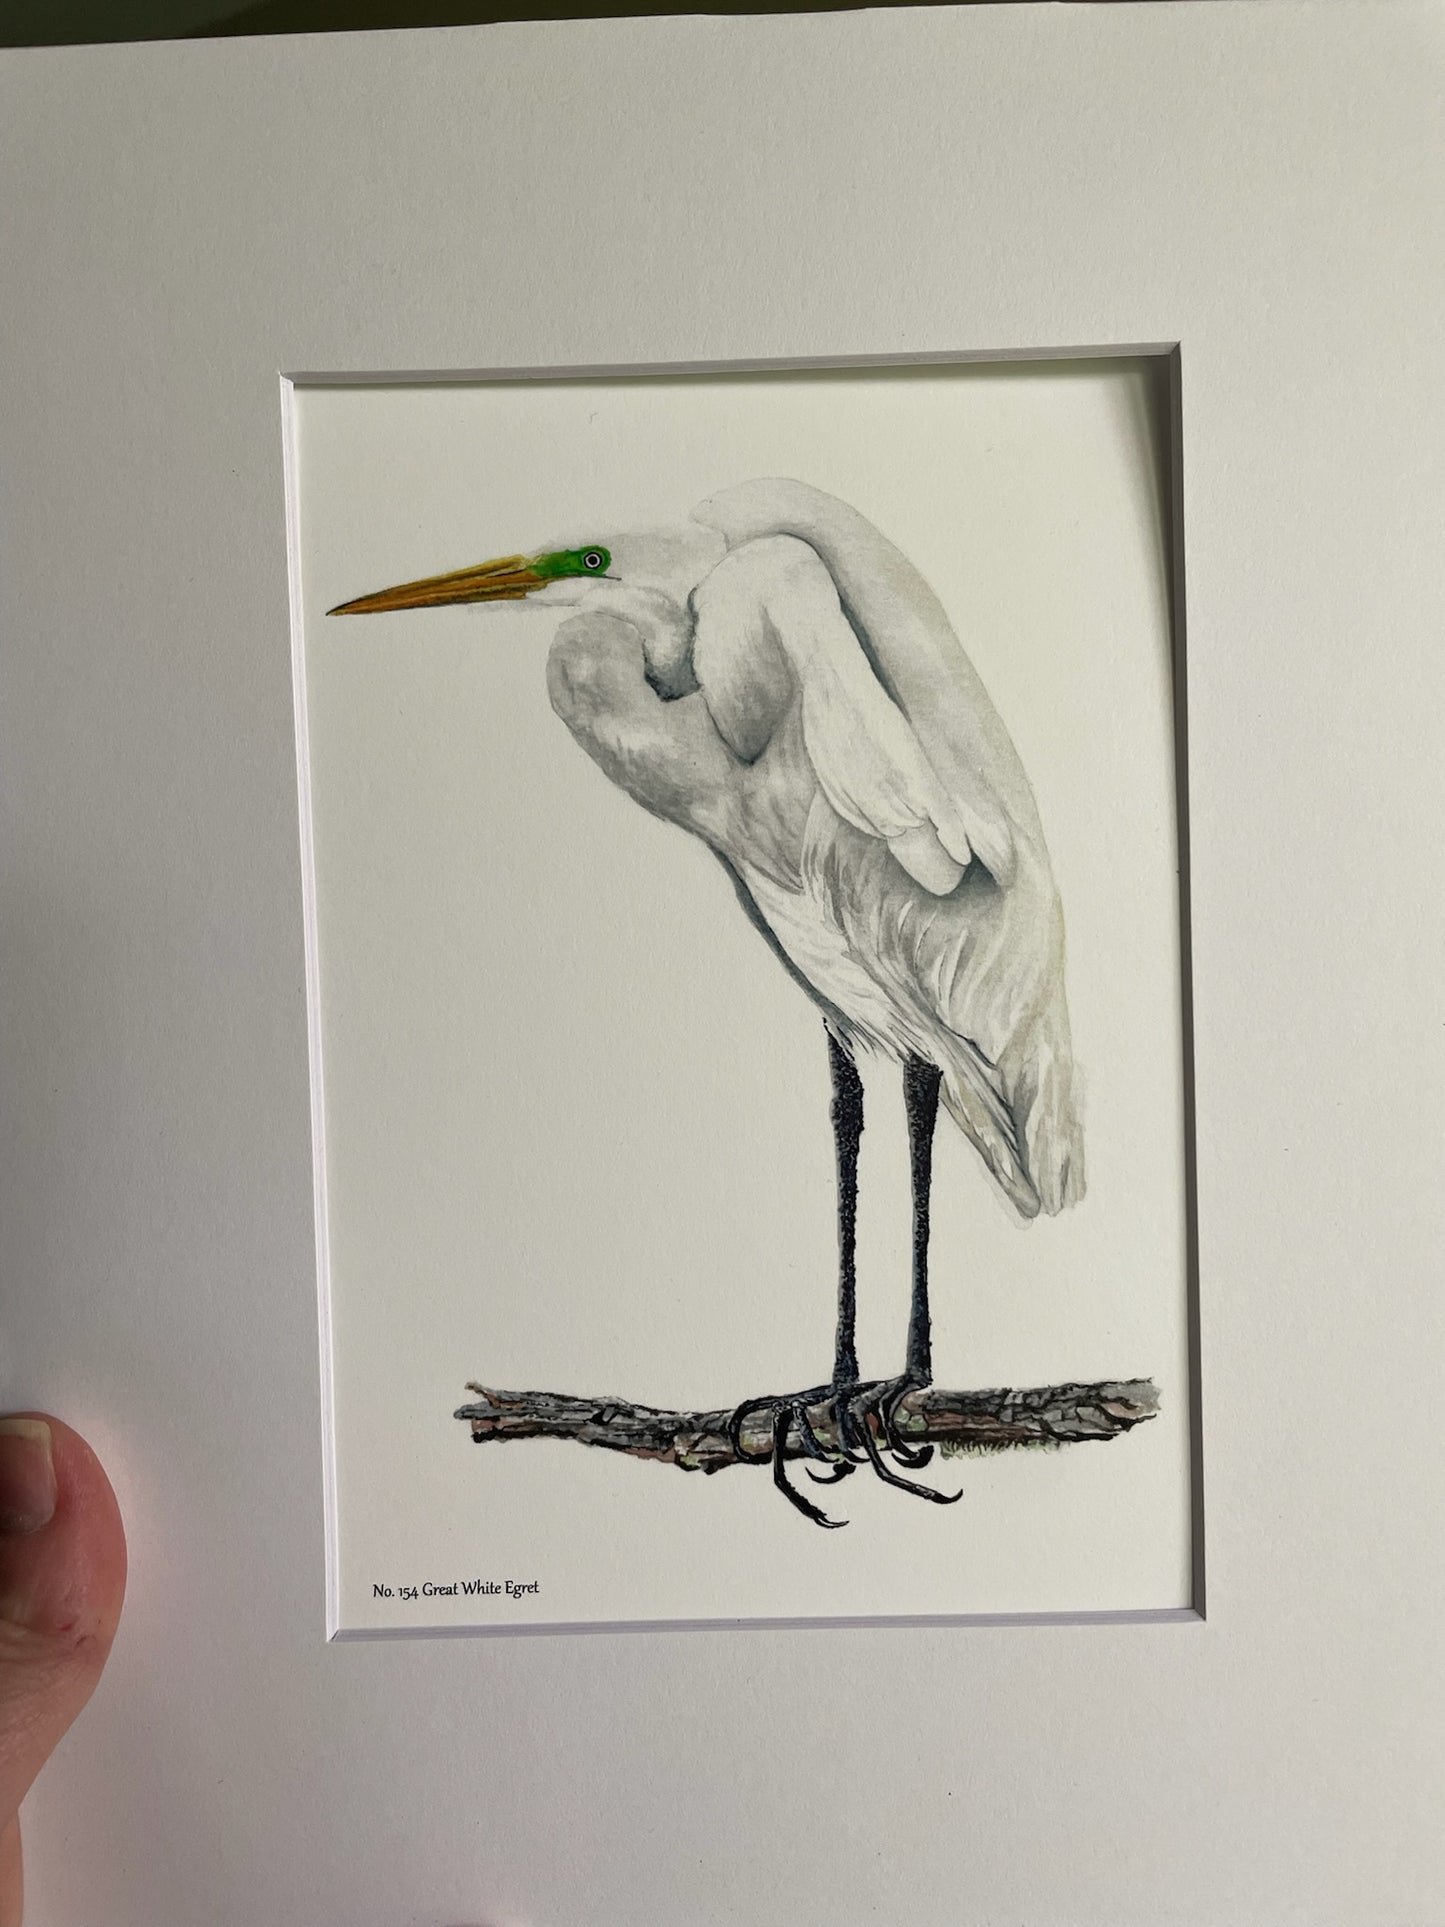 Great White Egret - Bird Art by KB - Giclee Print with White Mat